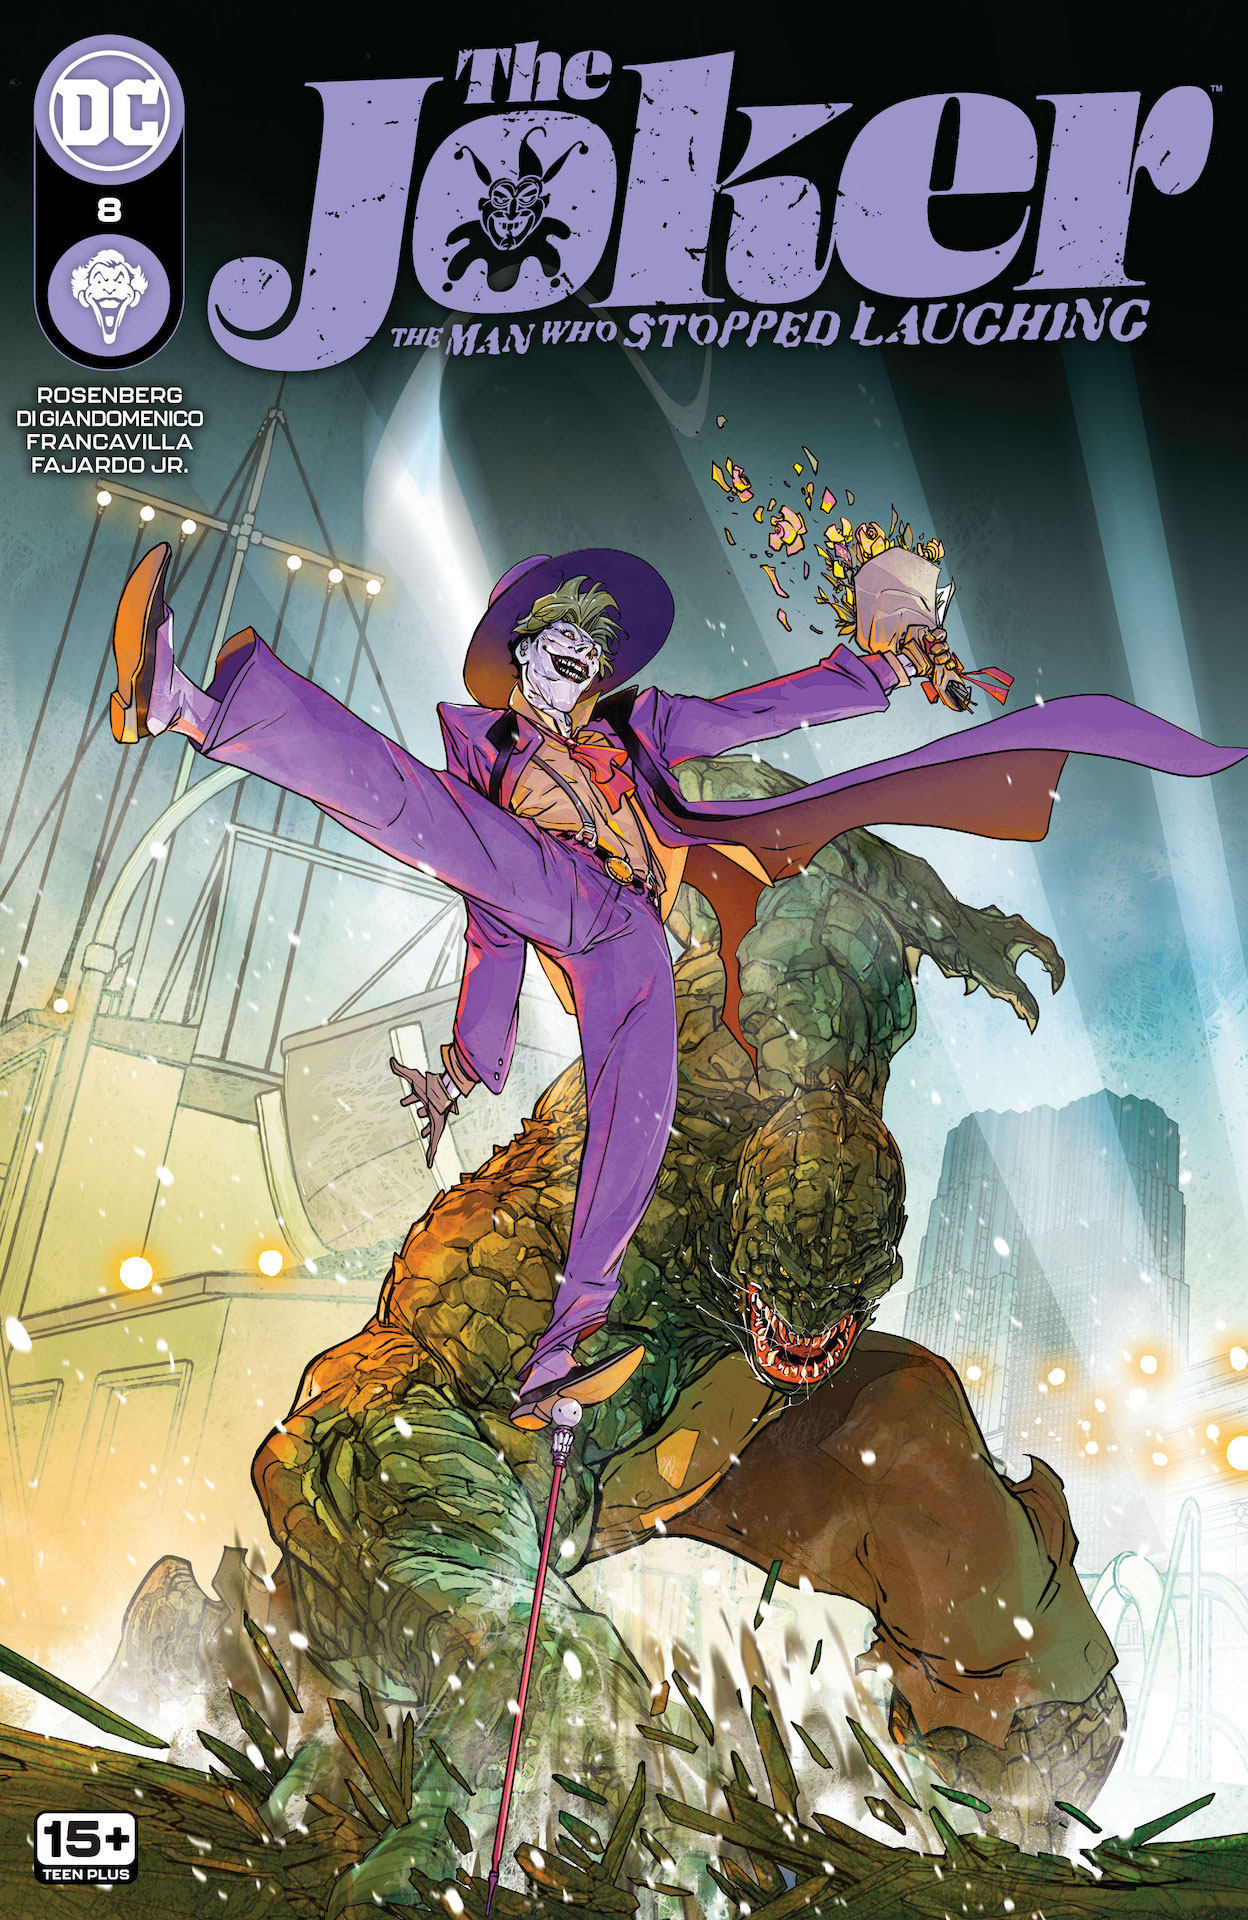 DC Preview: The Joker: The Man Who Stopped Laughing #8